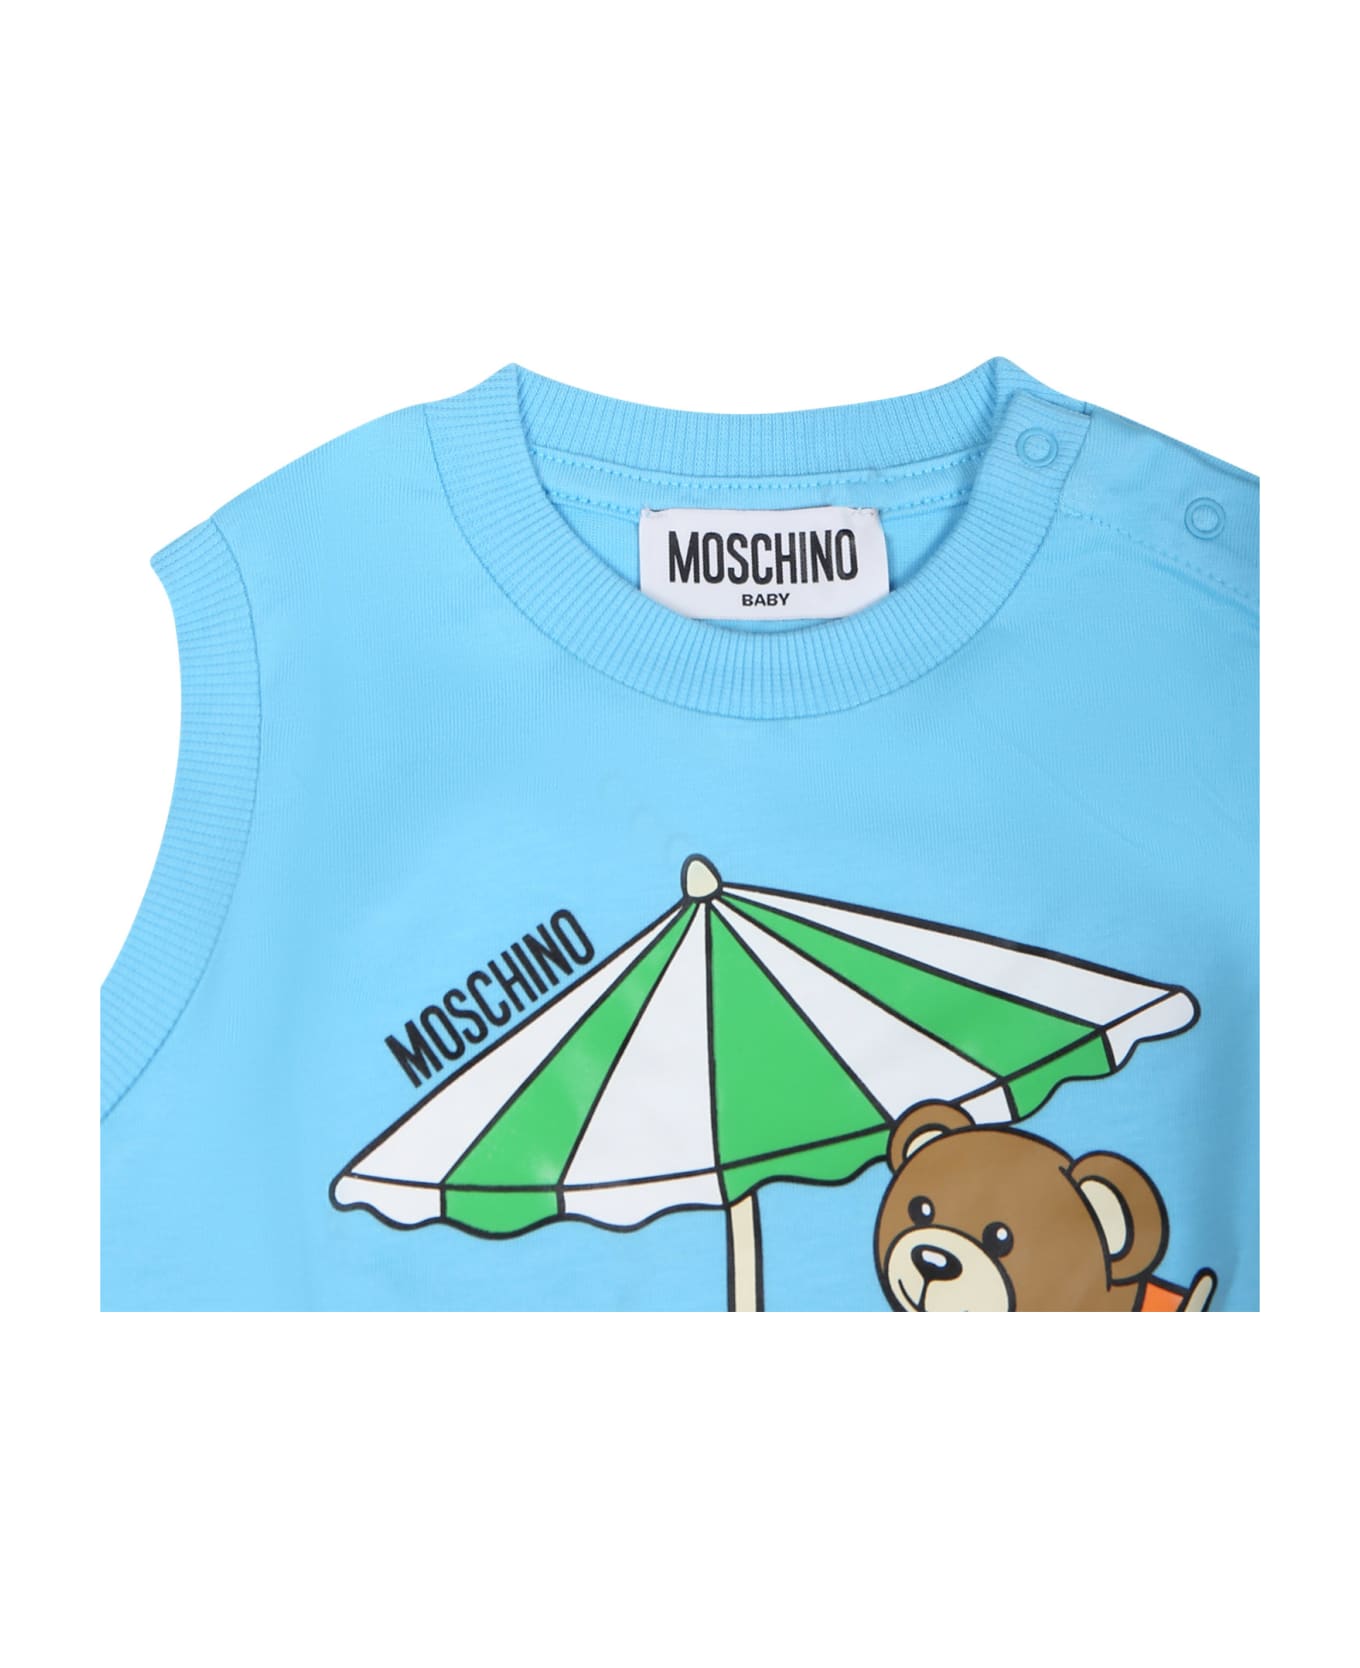 Moschino Sky Blue Sports Suit For Baby Boy With Teddy Bear - Light Blue ボトムス